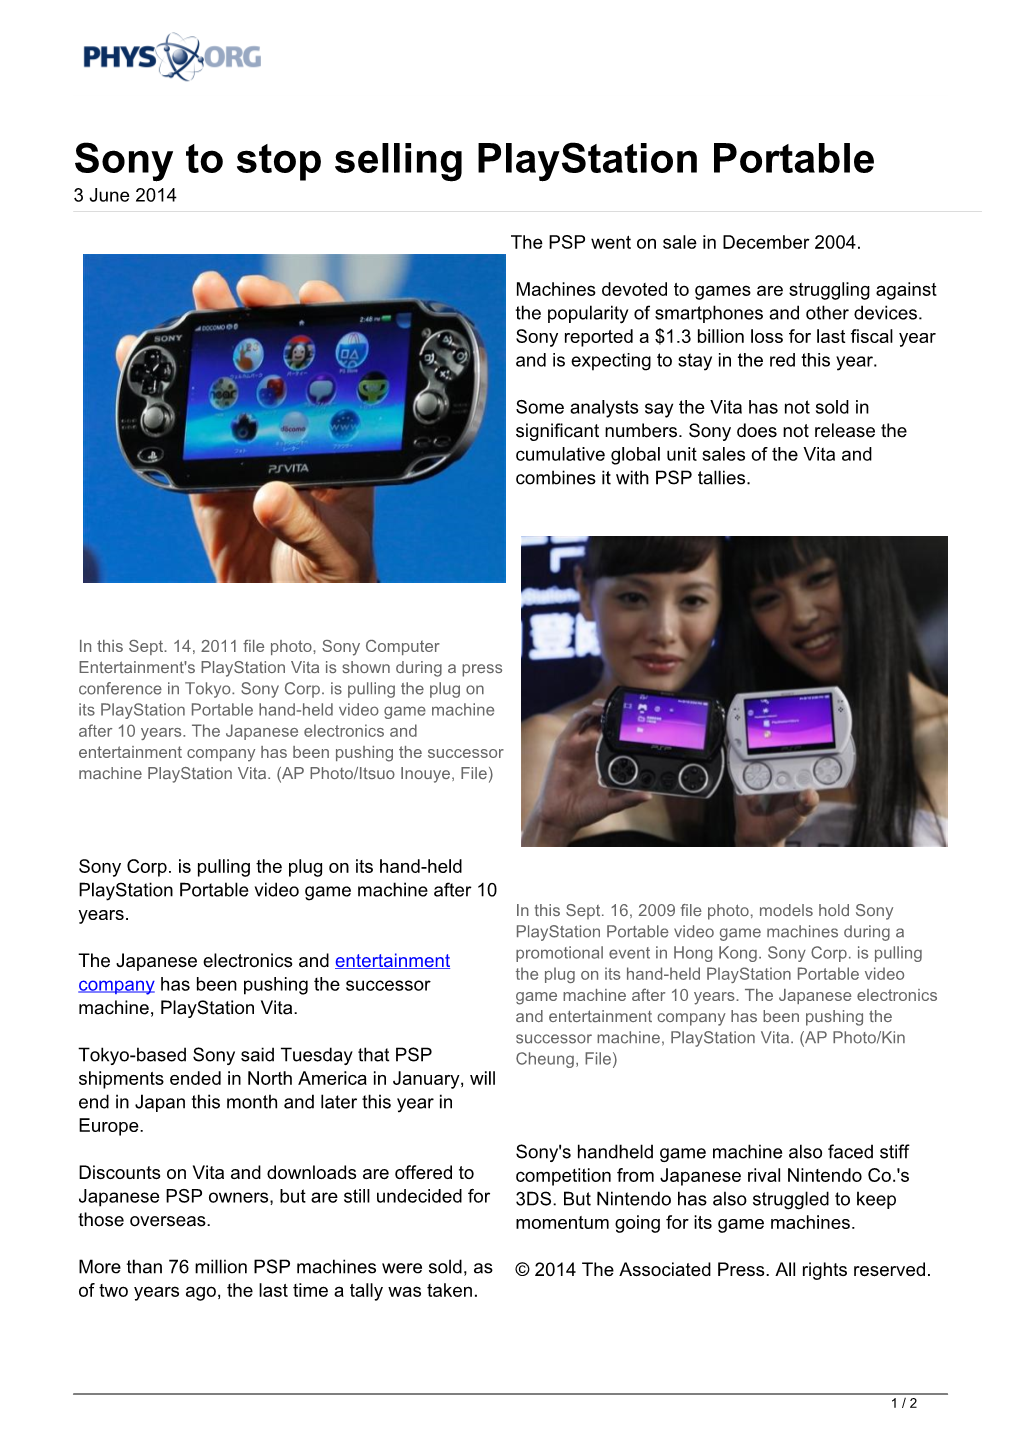 Sony to Stop Selling Playstation Portable 3 June 2014